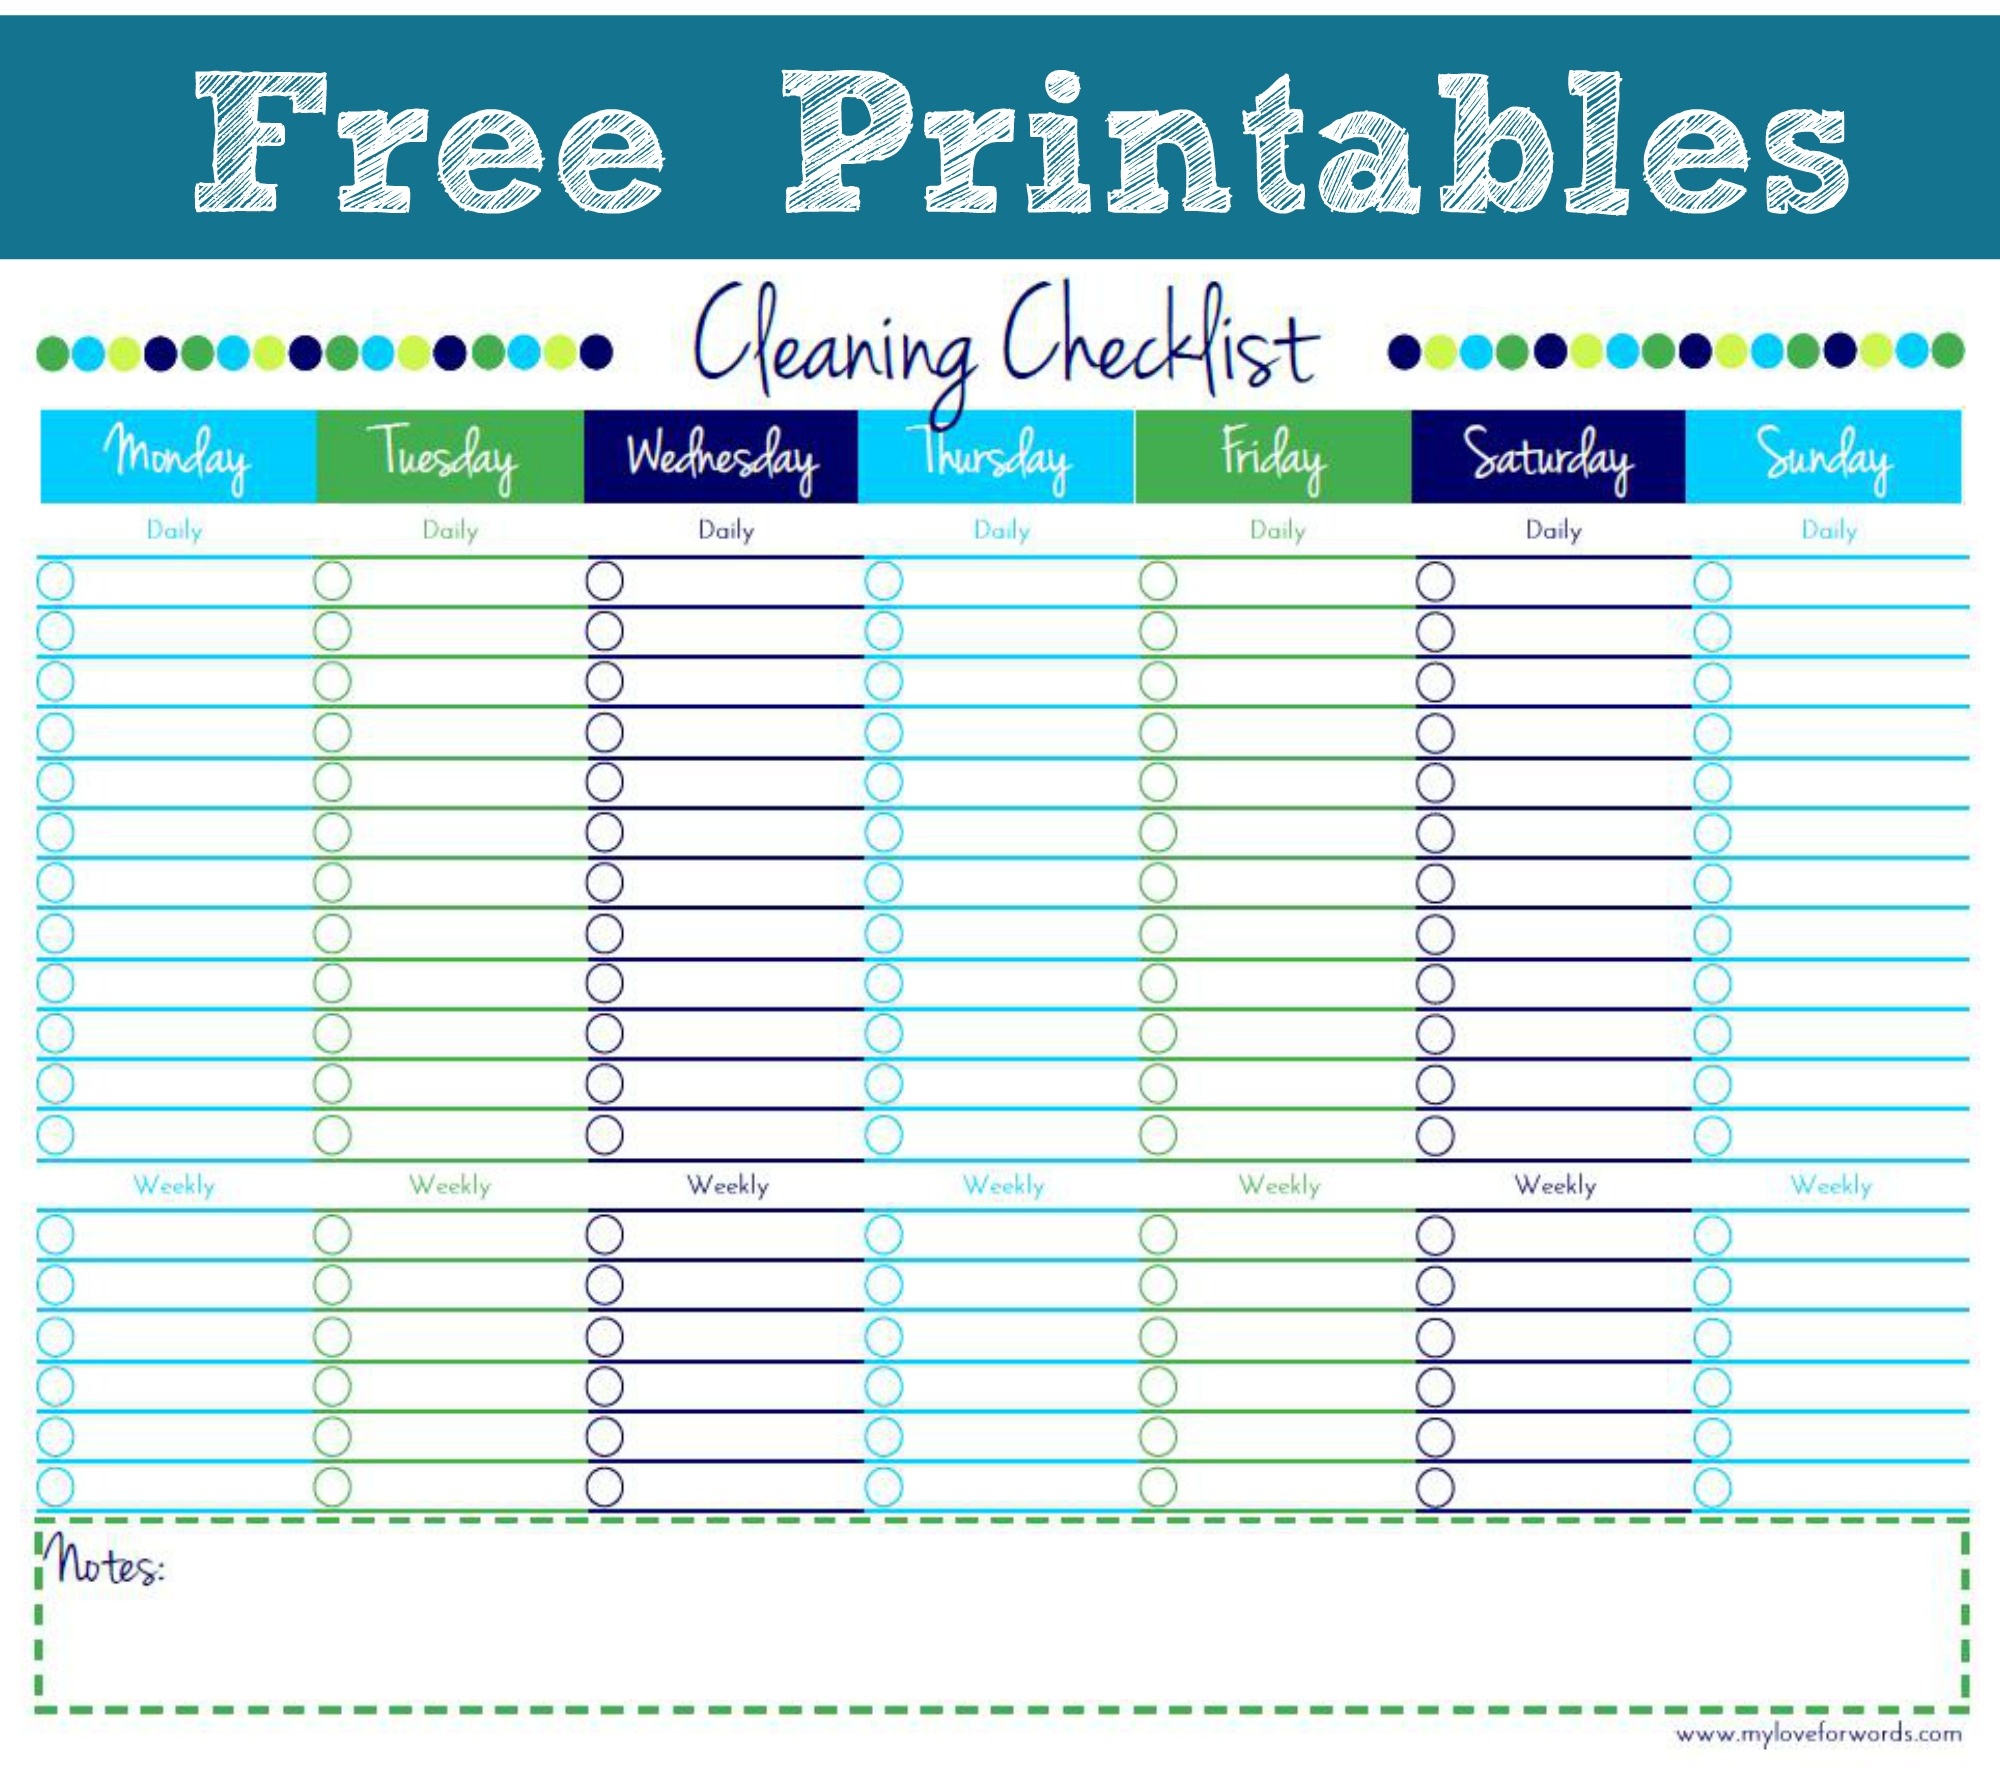 Cleaning Checklist {Free Printable} - Free Printable Cleaning Schedule Template